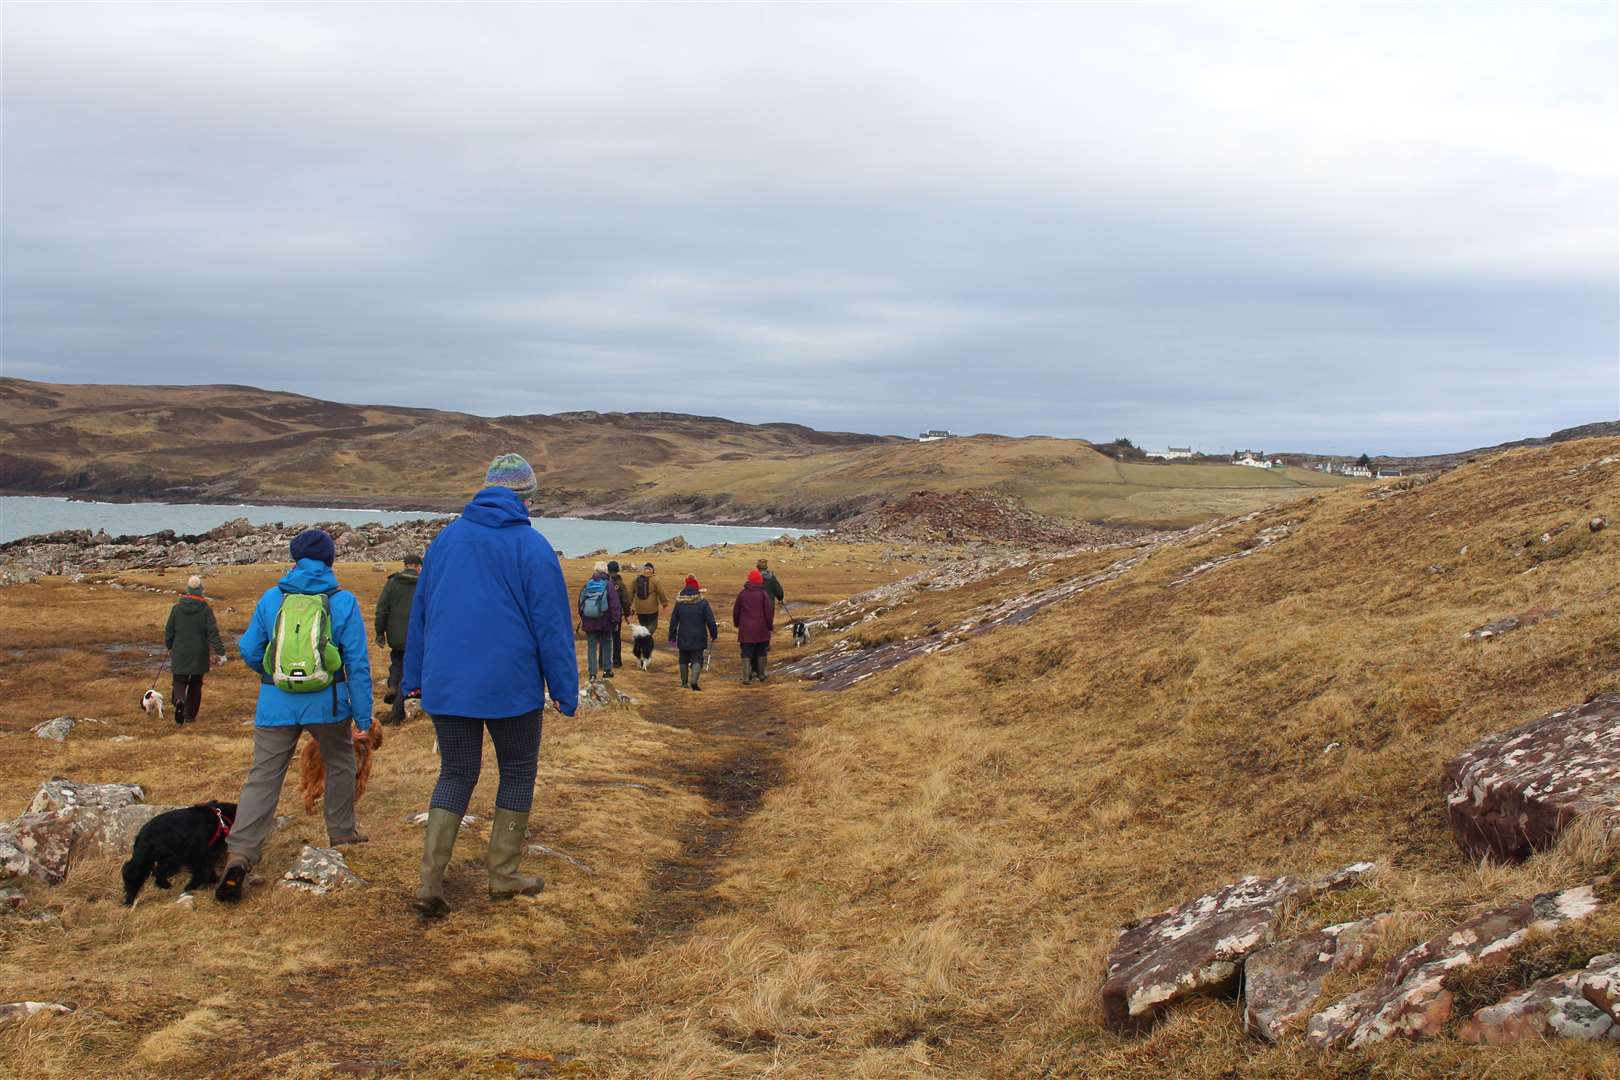 The group heads towards the broch.